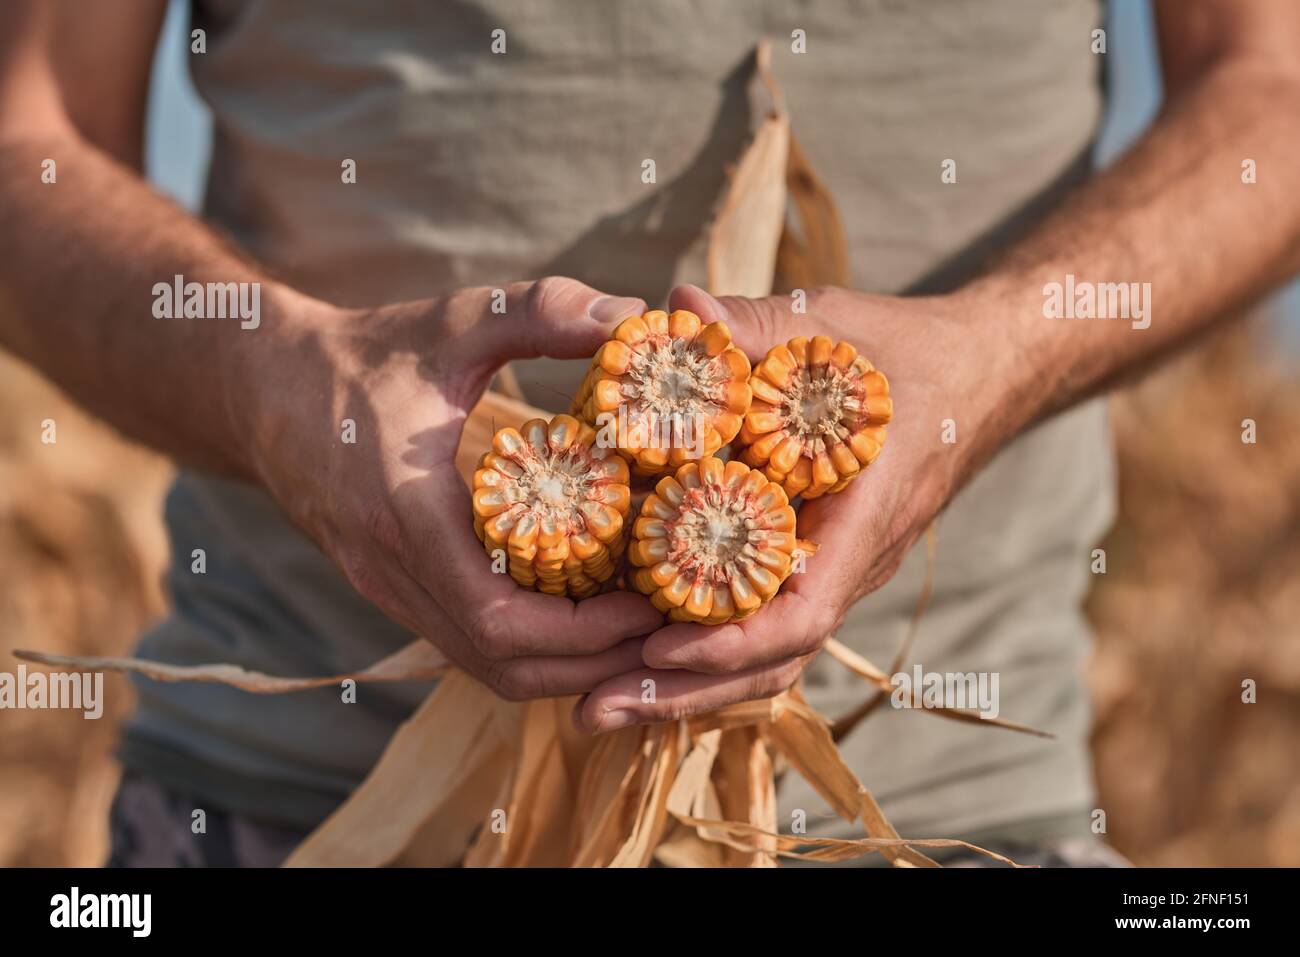 Farmer holding harvested corn on the cob in agricultural field, portrait of male farm worker during successful harvest of maize crops Stock Photo